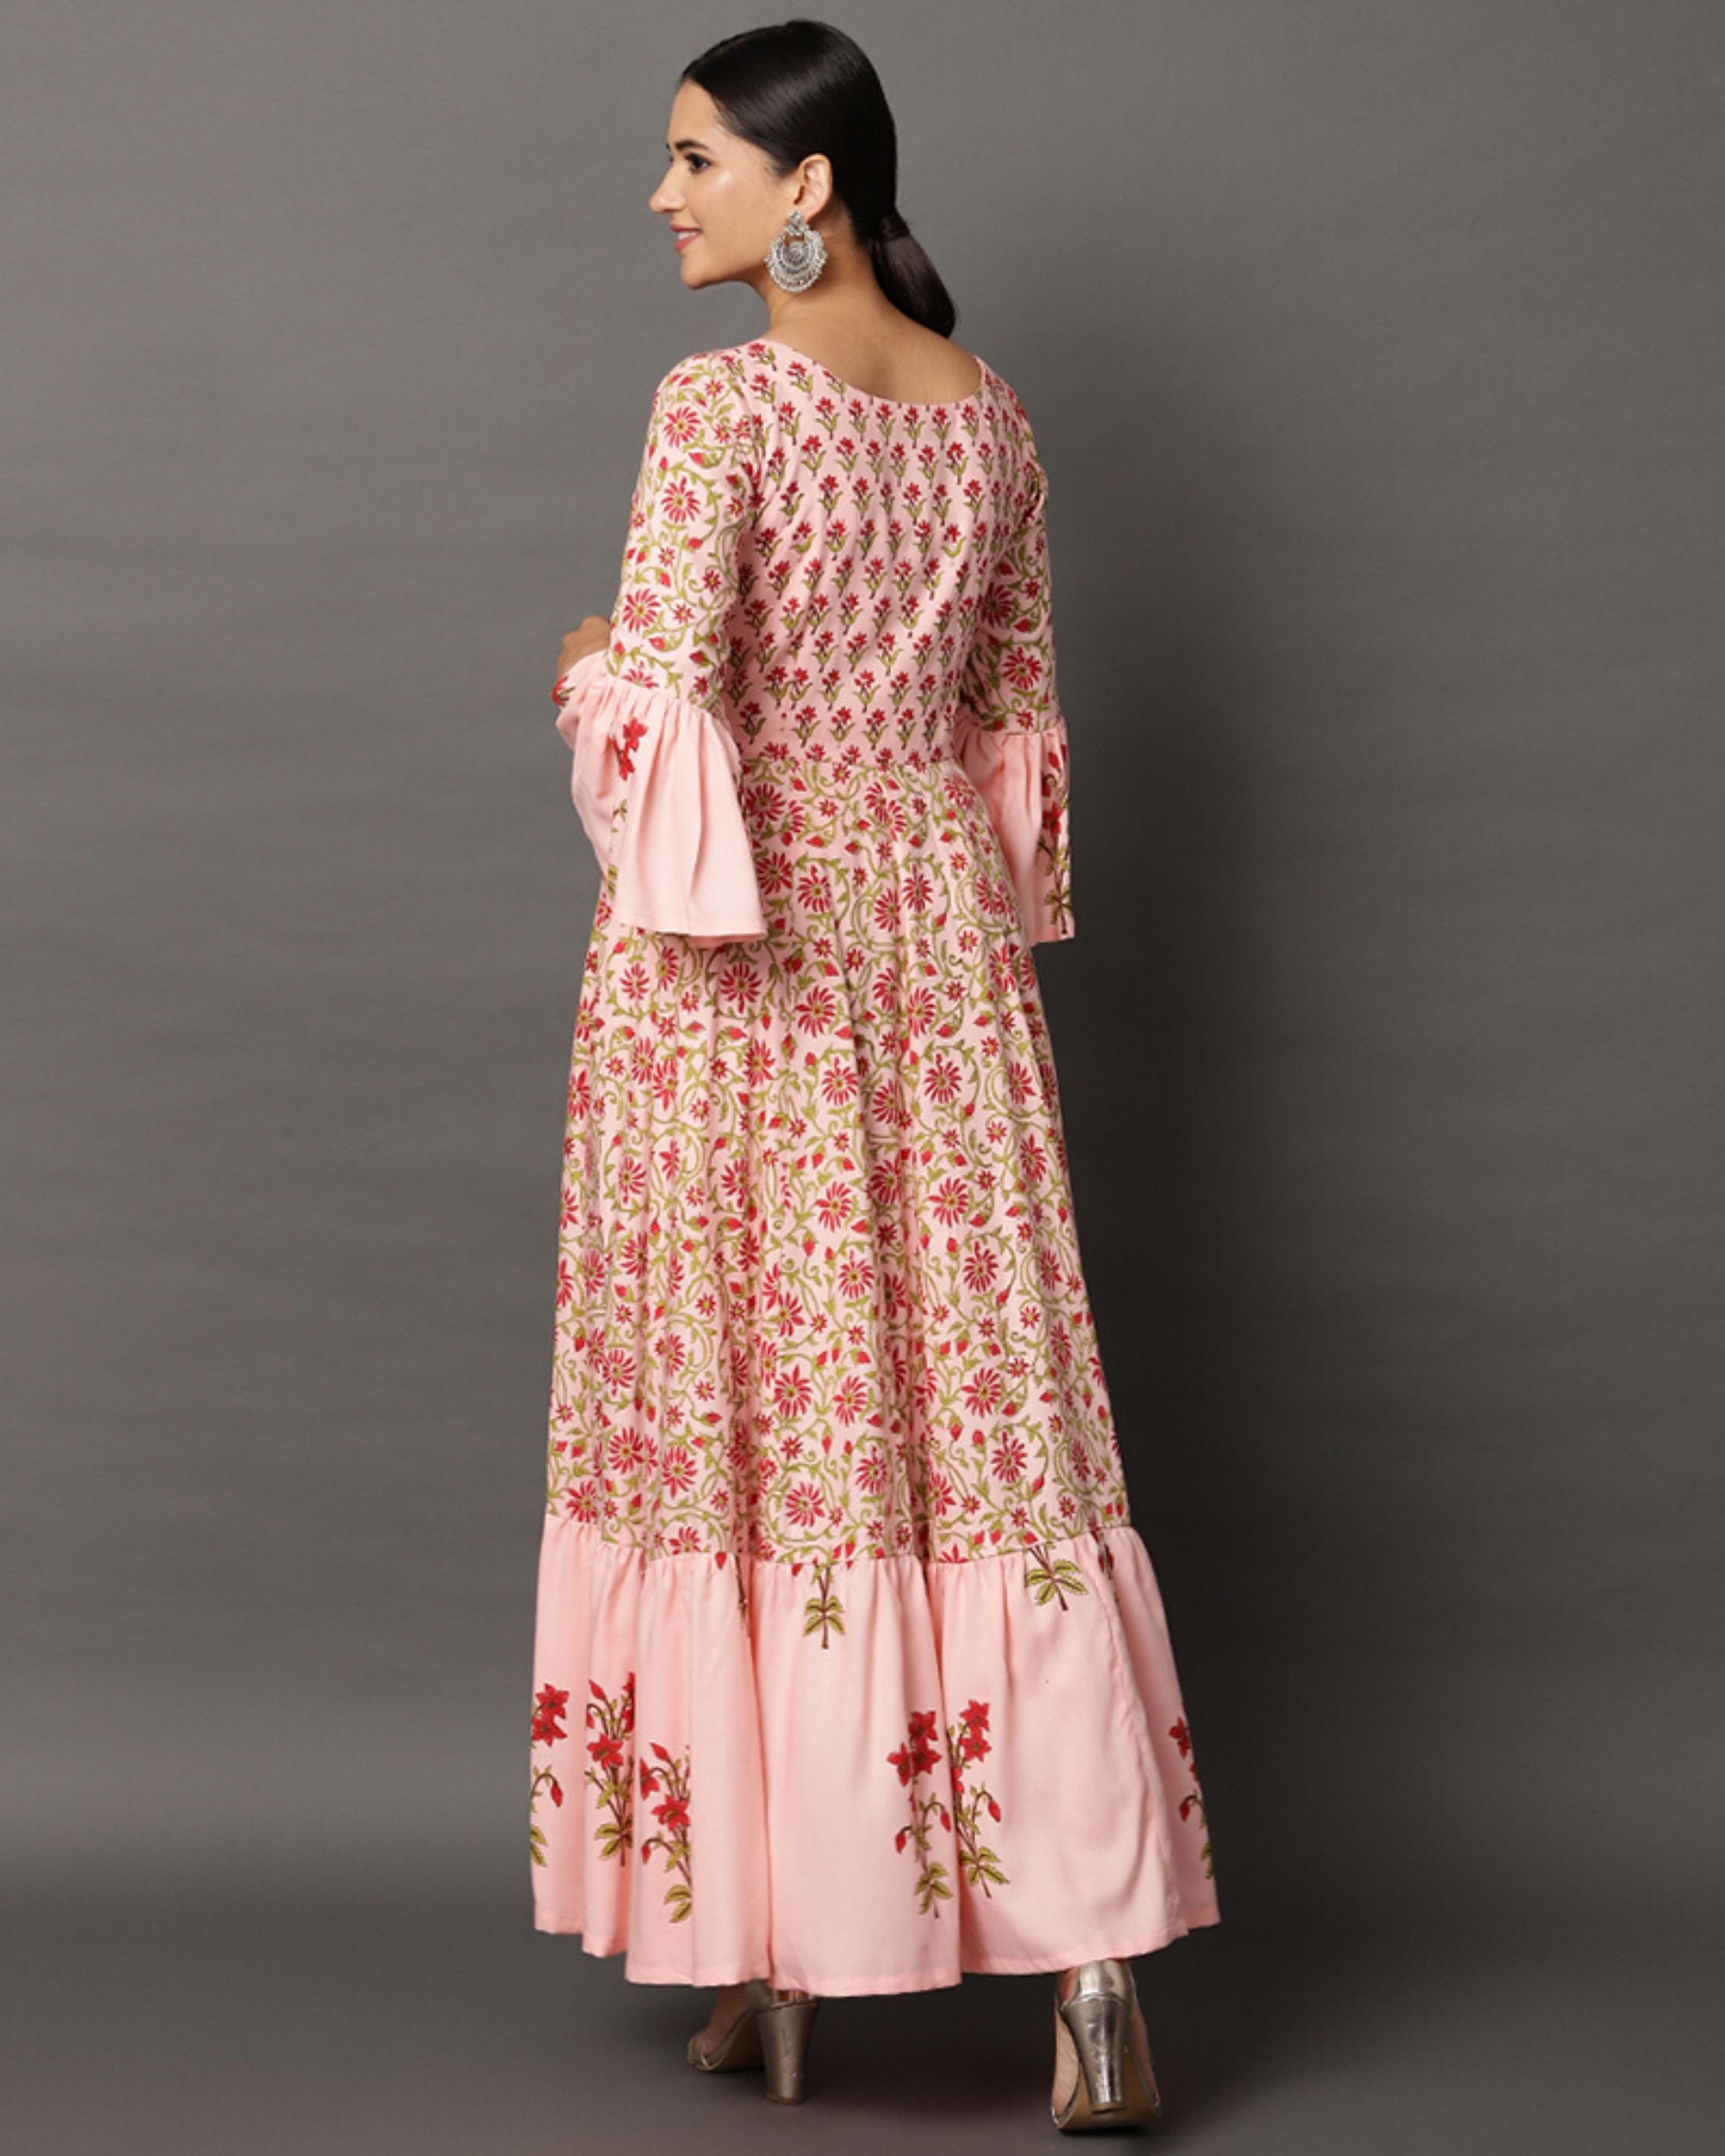 Peach tiered floral ruffled maxi dress by Rivaaj | The Secret Label